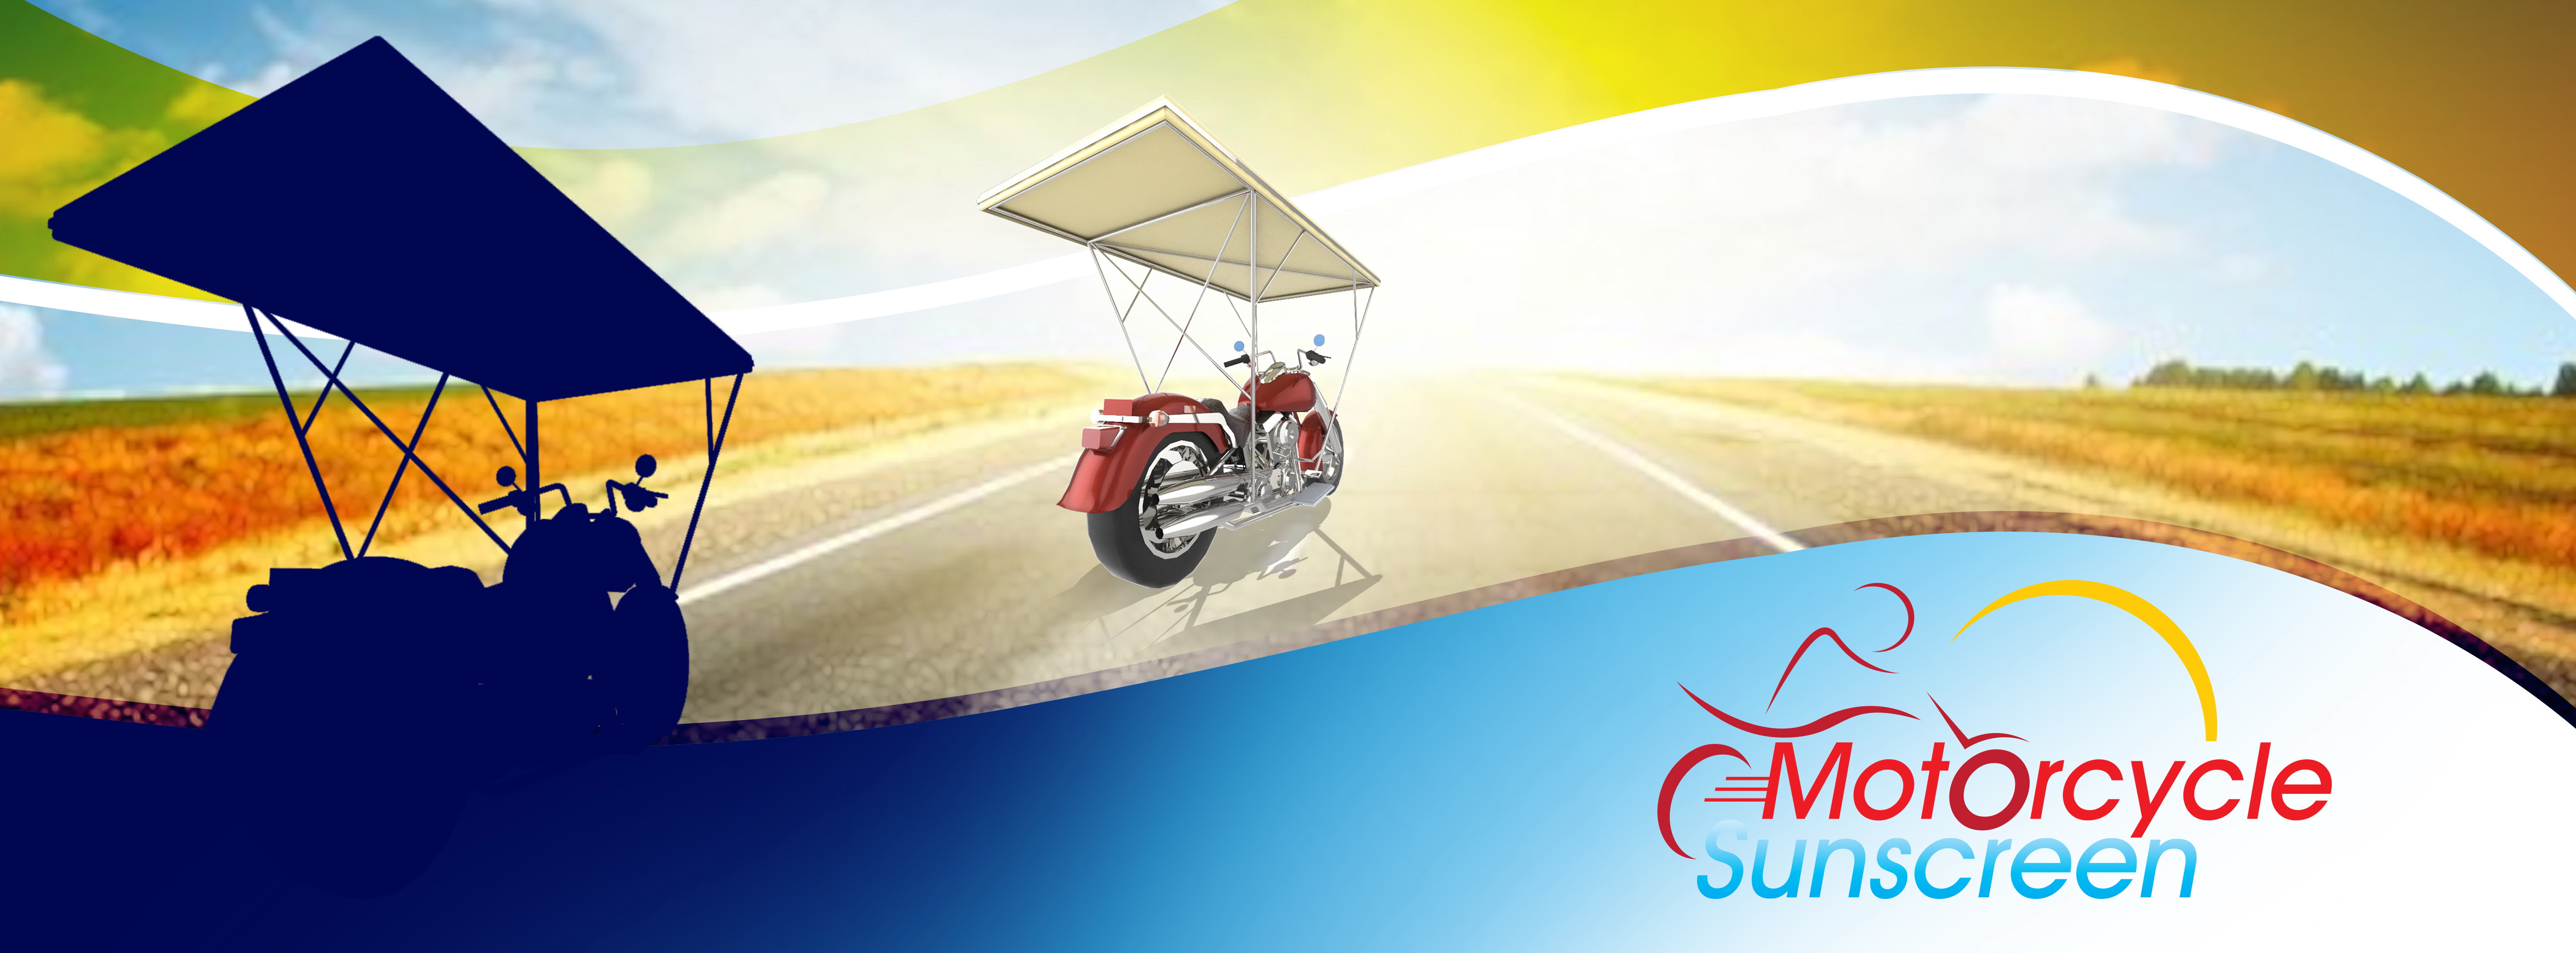 The Motorcycle Sunscreen offers added safety and comfort features to those who drive motorcycles